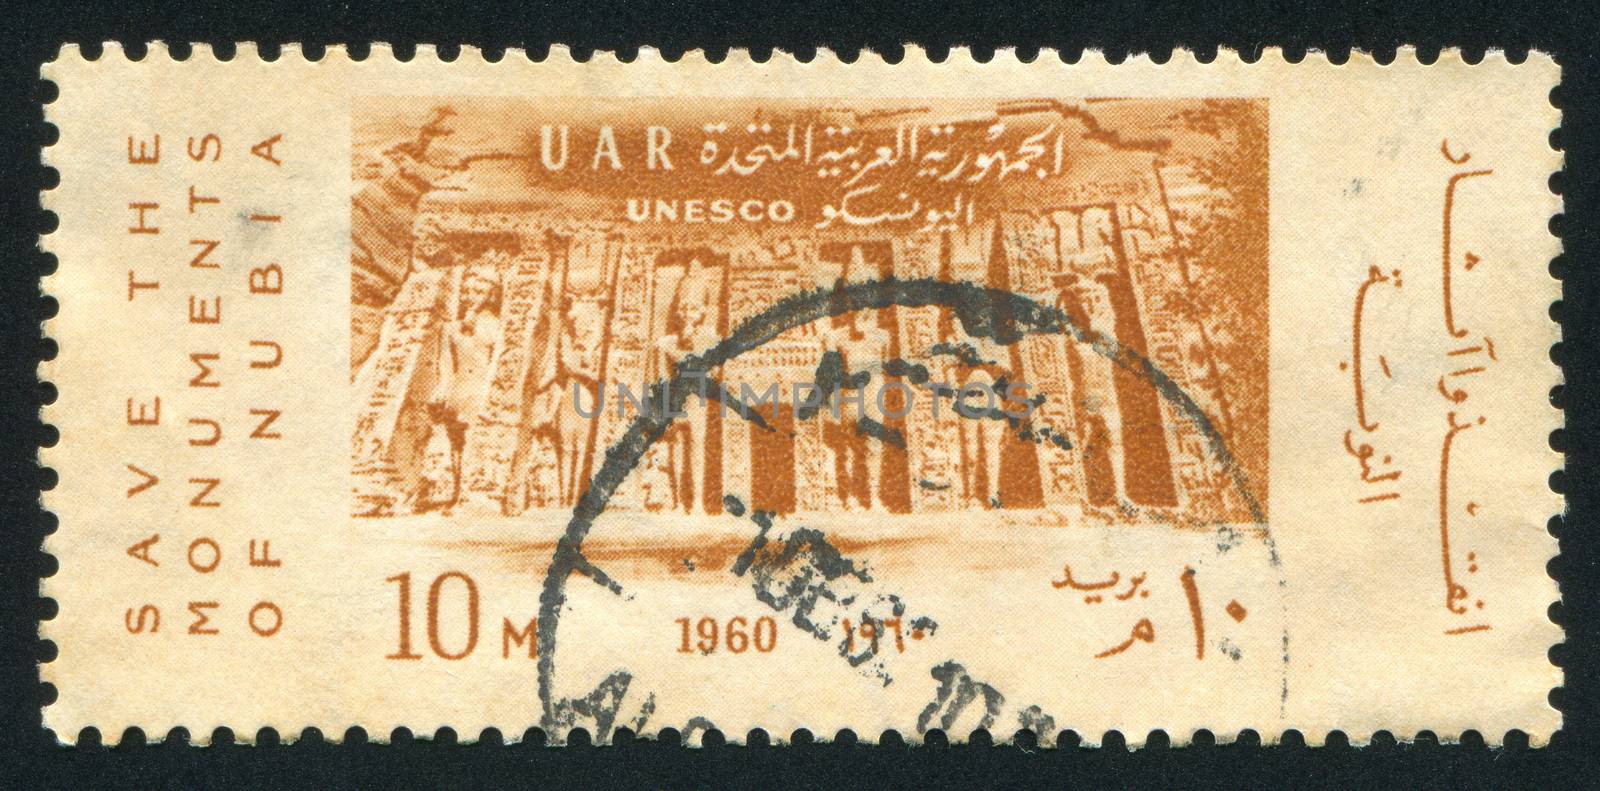 EGYPT - CIRCA 1960: stamp printed by Egypt, shows Monuments of Nubia, circa 1960